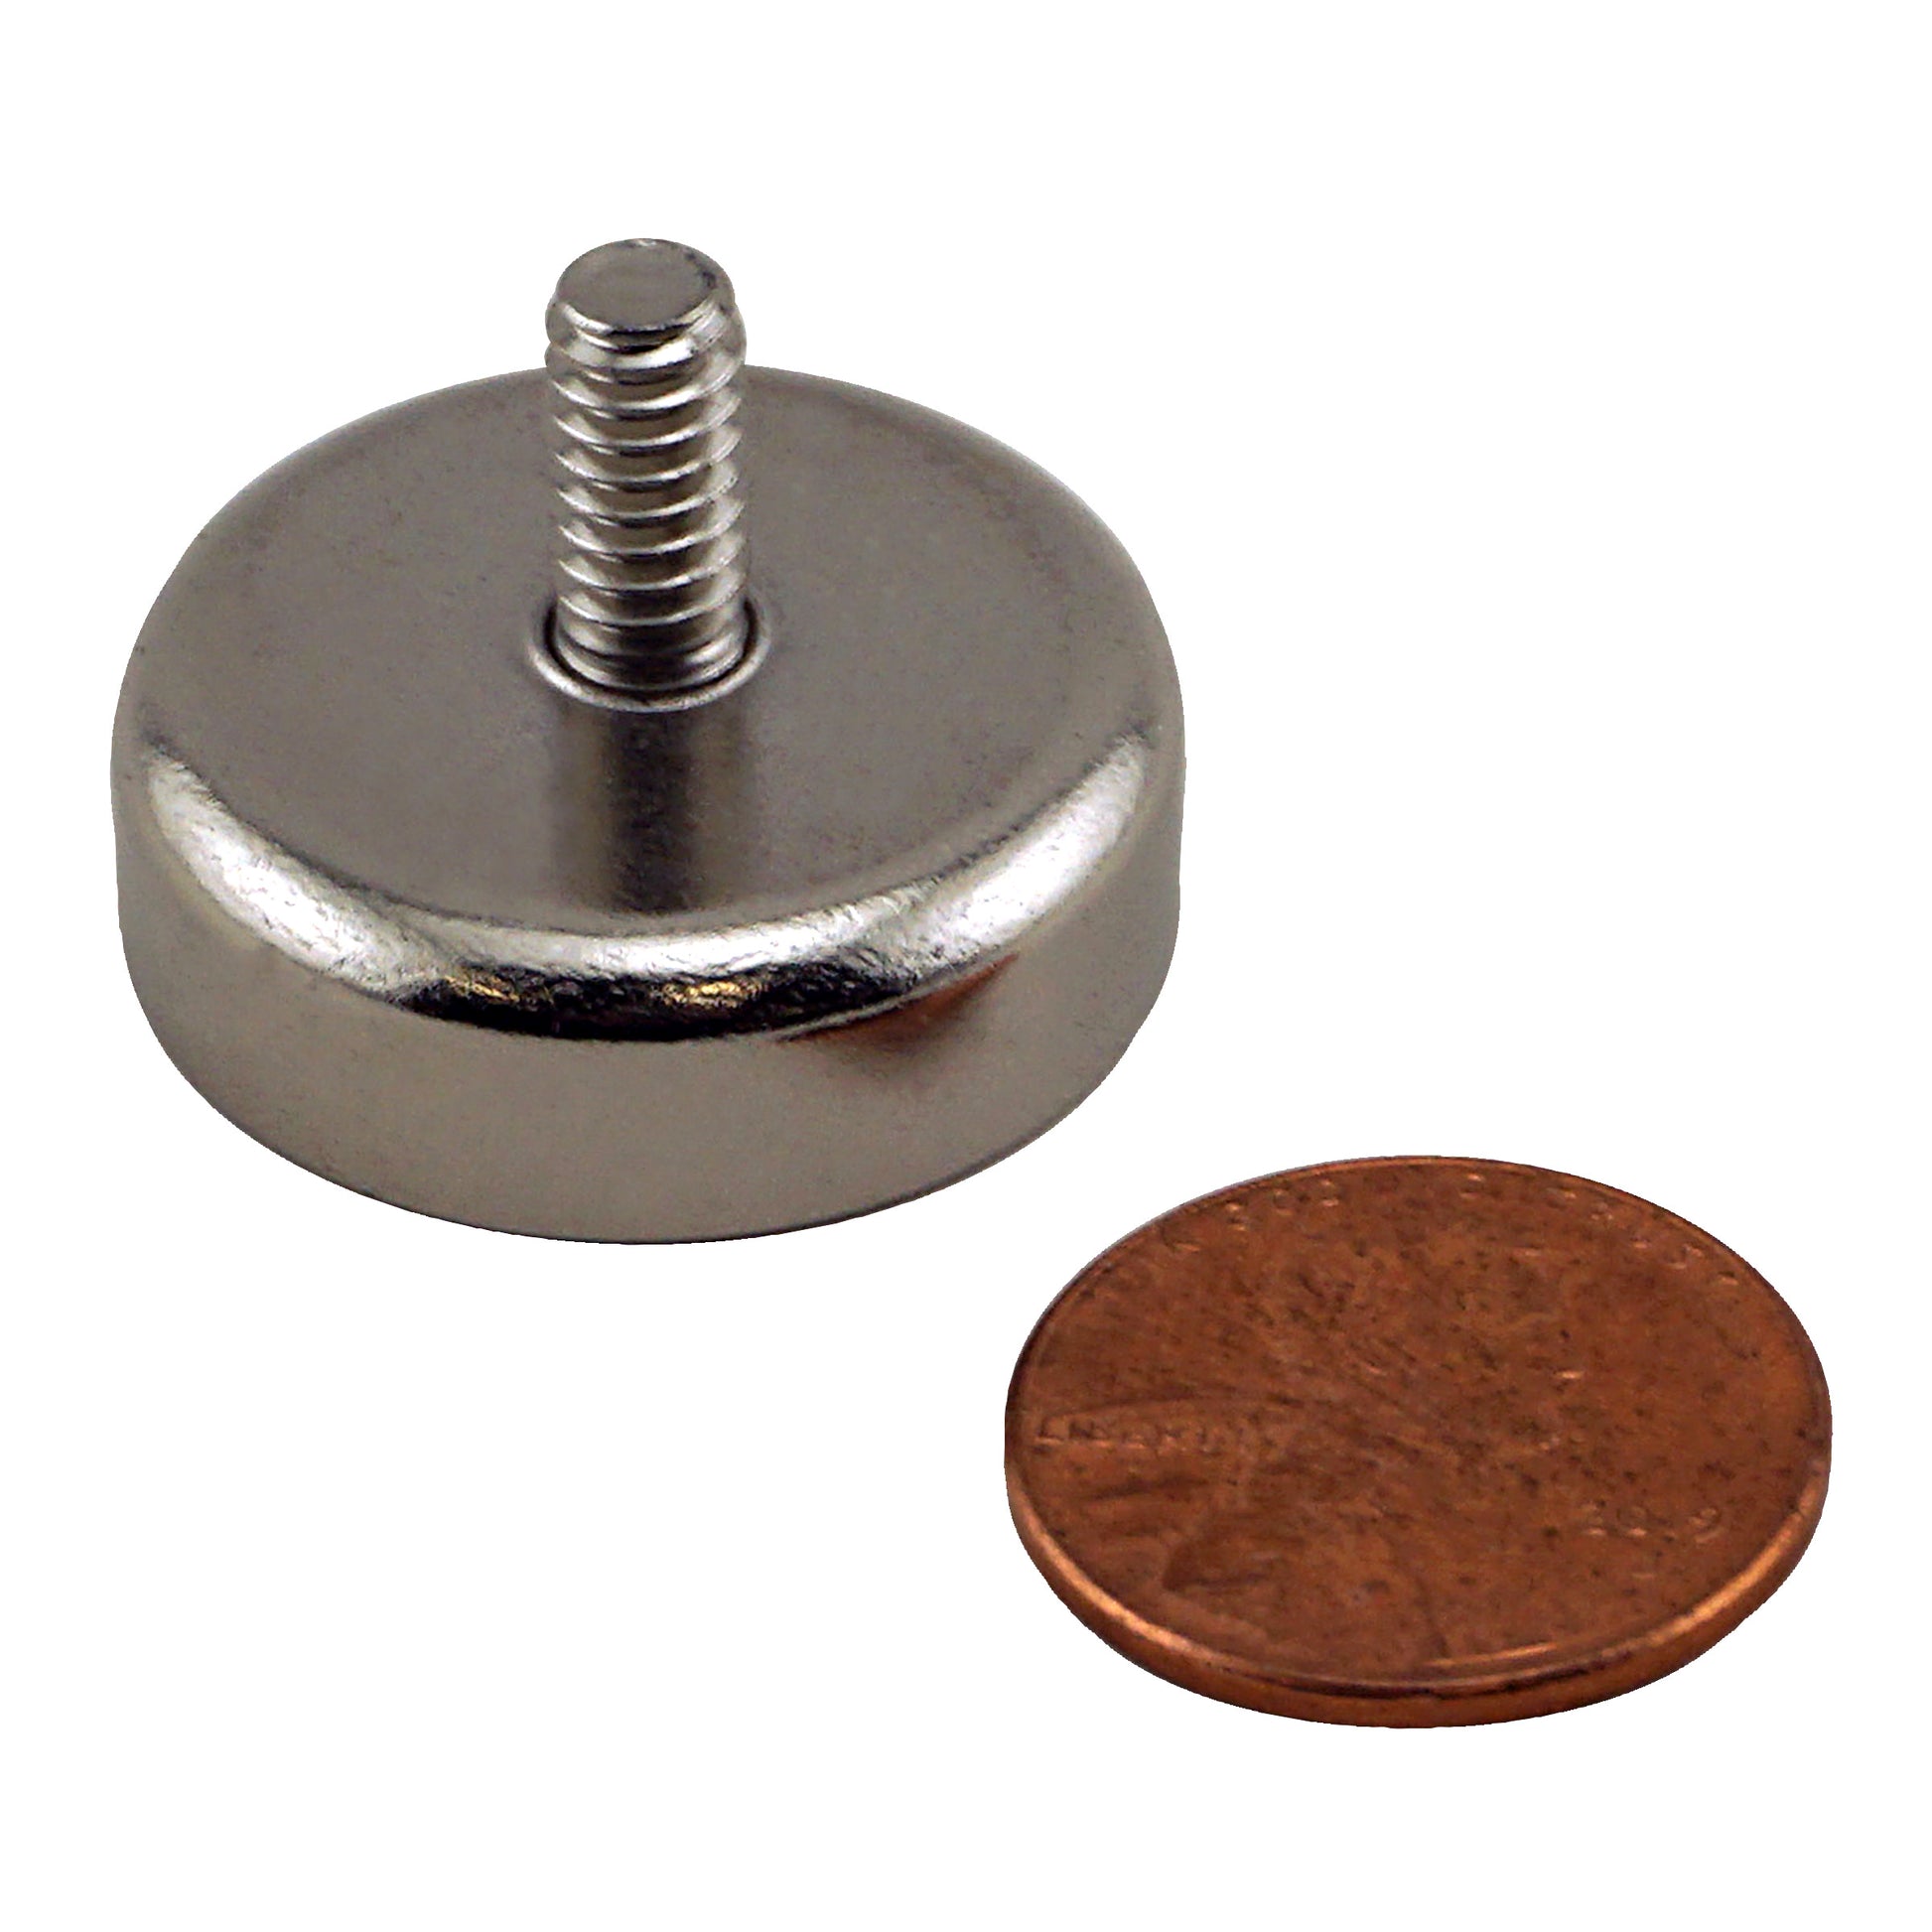 Load image into Gallery viewer, CACM098 Ceramic Round Base Magnet with Male Thread - Compared to Penny for Size Reference